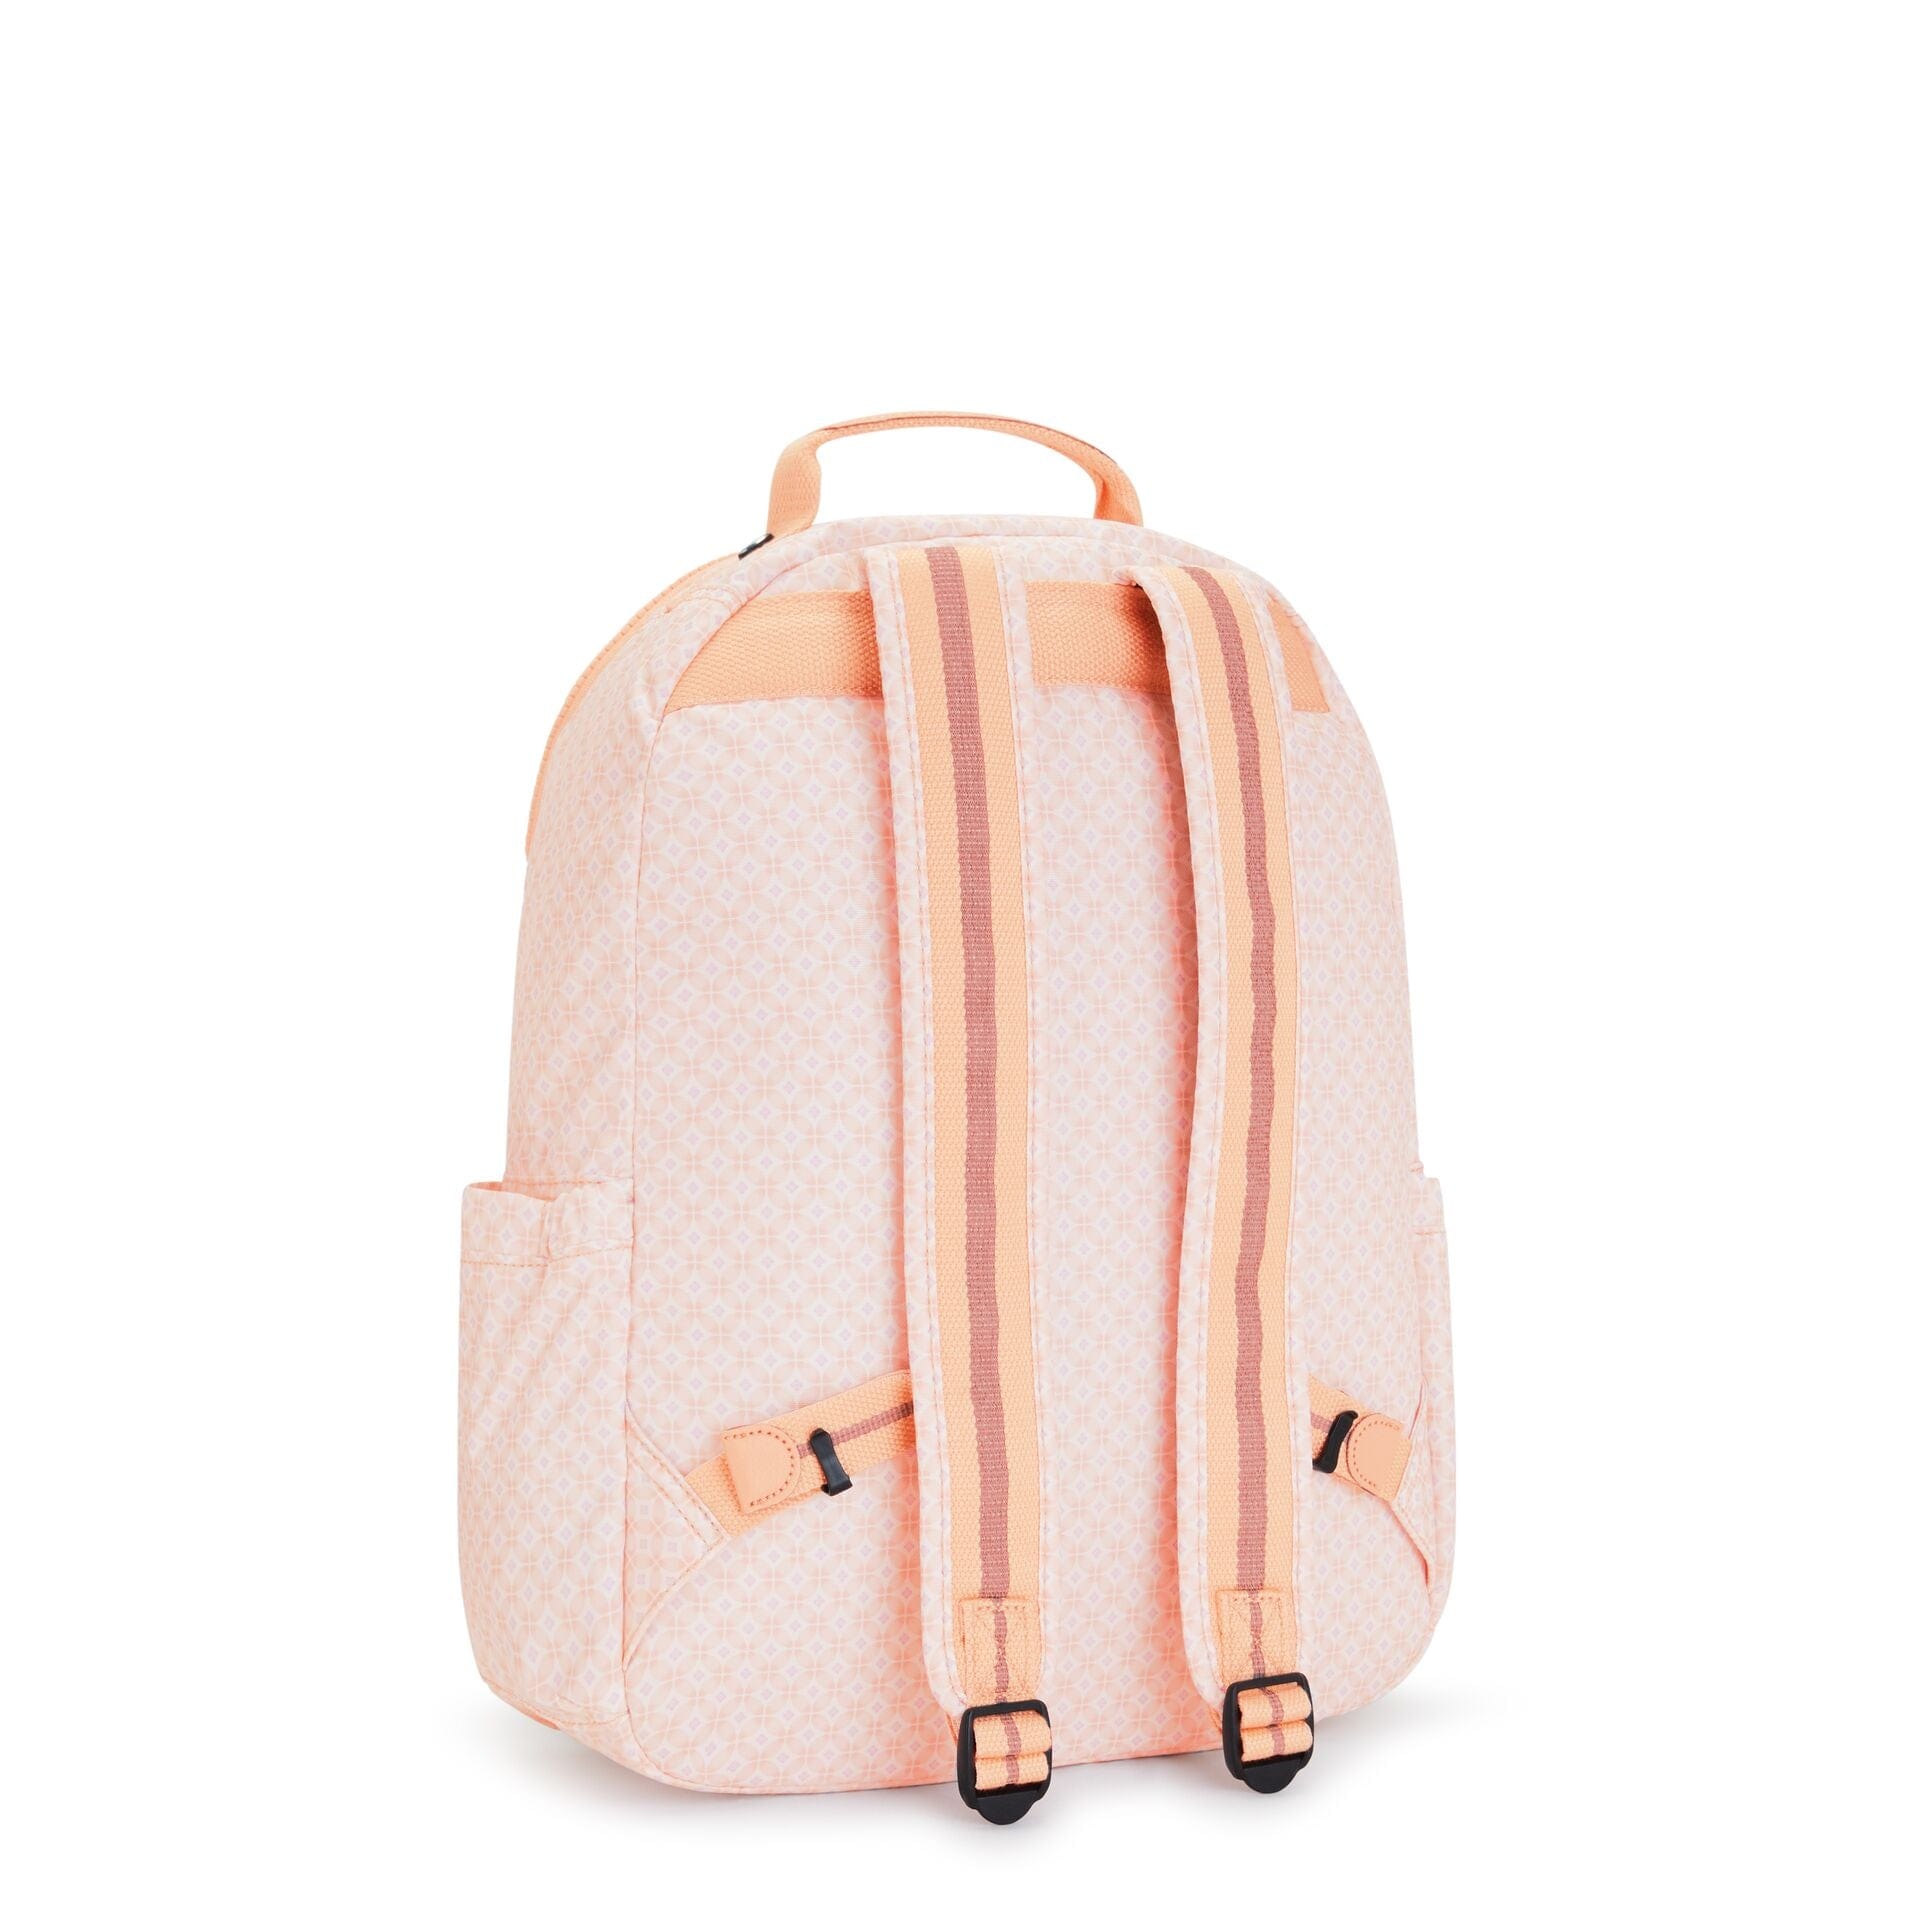 Kipling-Seoul-Large Backpack With Padded Laptop Compartment-Girly Tile Prt-I4851-5Eh